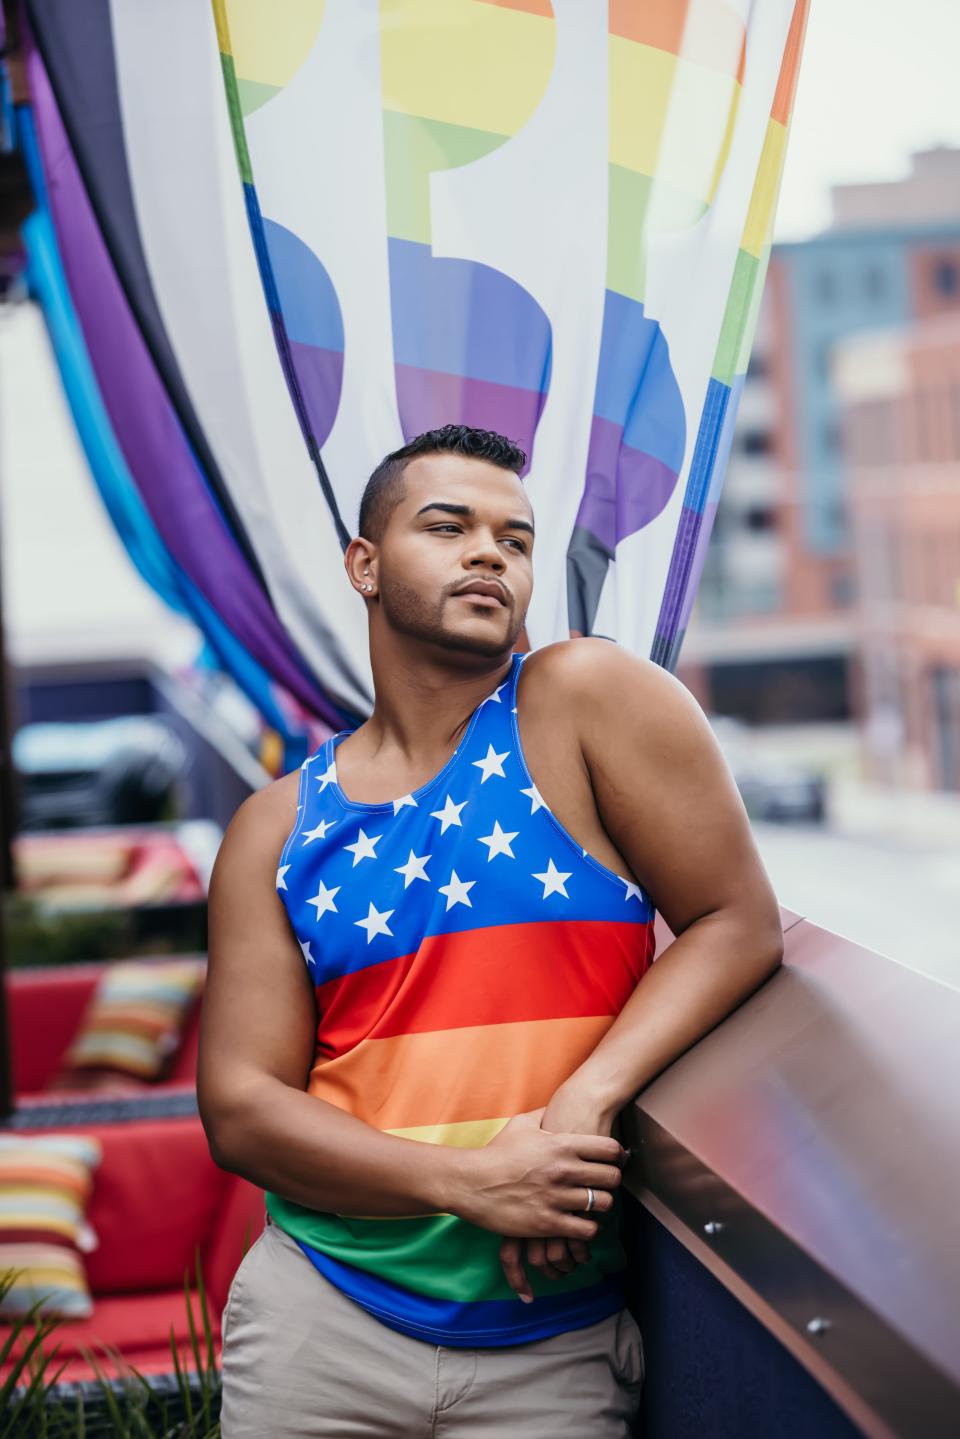 Jacob Sanchez-Principle performs at the Garden and other venues in Des Moines. This year, he served as the head judge for the Capital City Pride pageant.